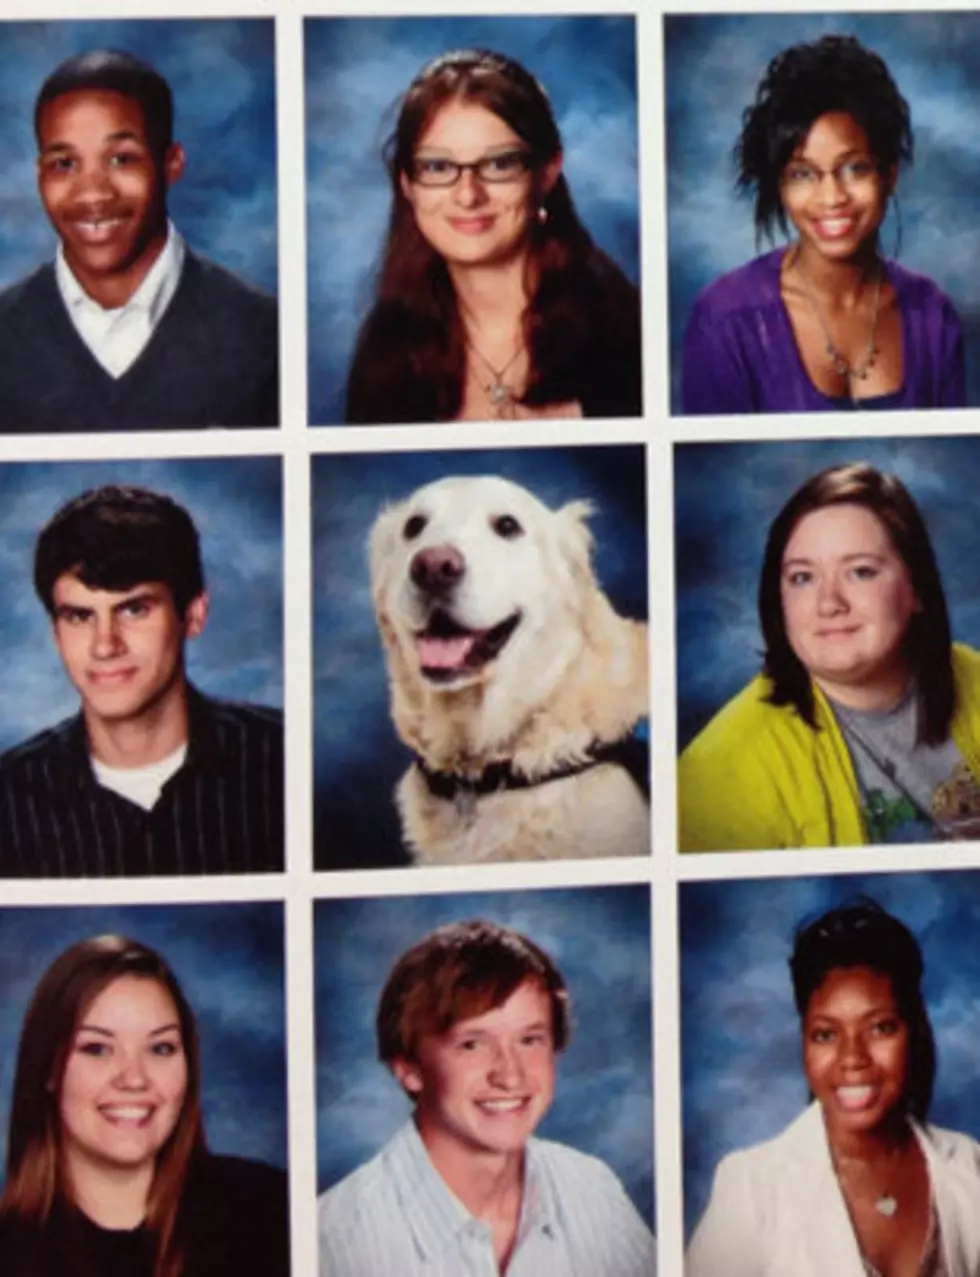 A Dog is Pictured in a Yearbook and it’s Not a Prank